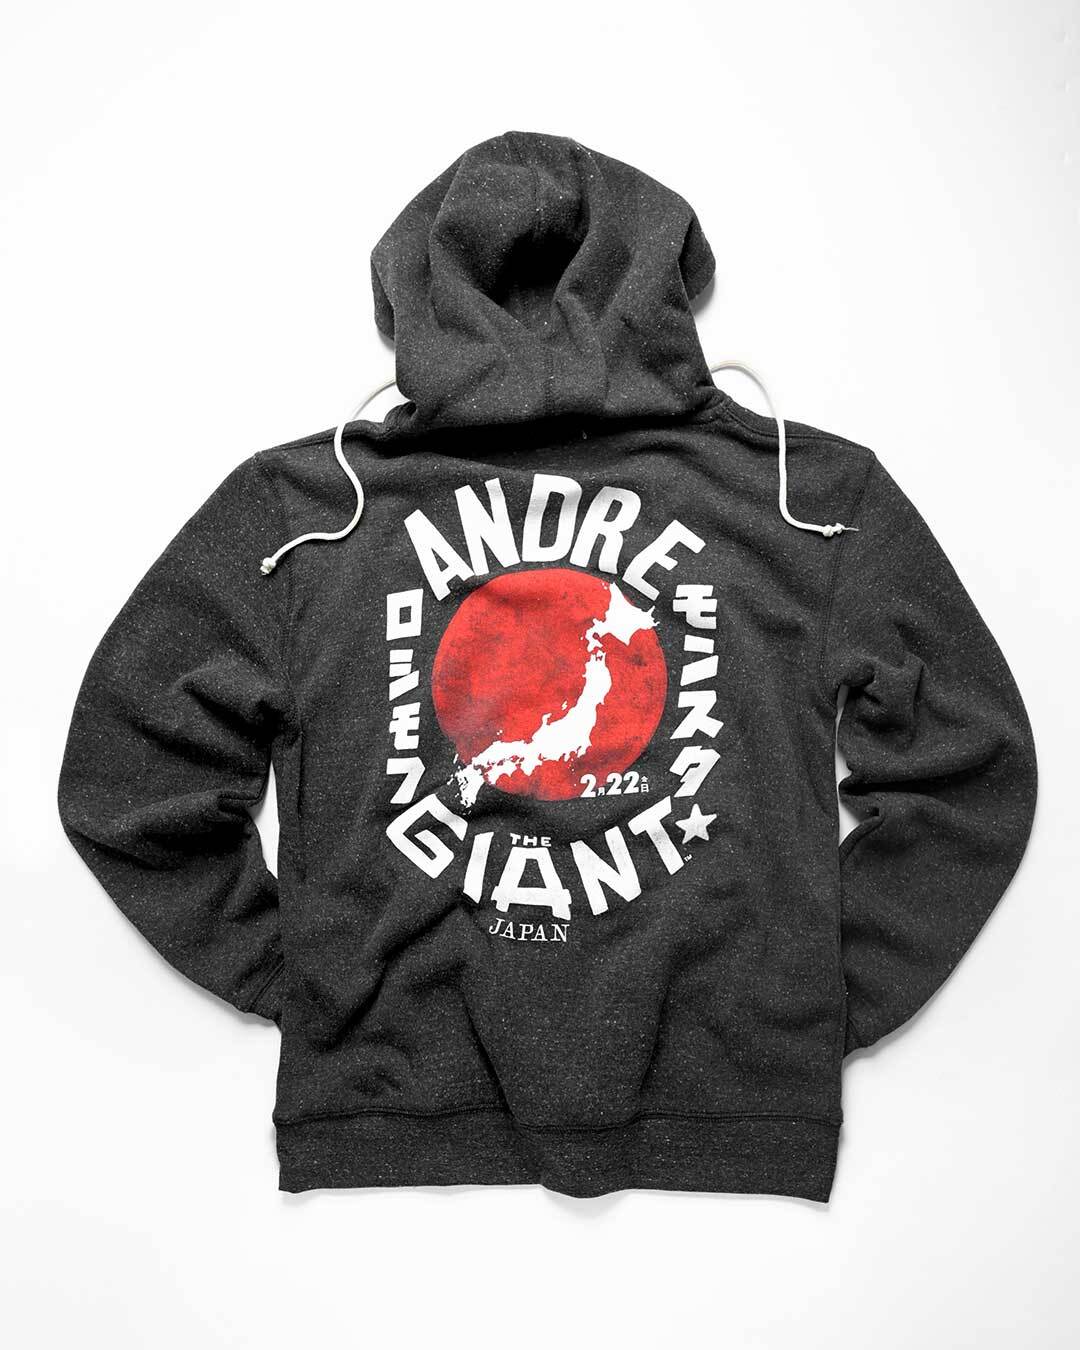 Andre the Giant Japan Black PO Hoody - Roots of Fight Canada